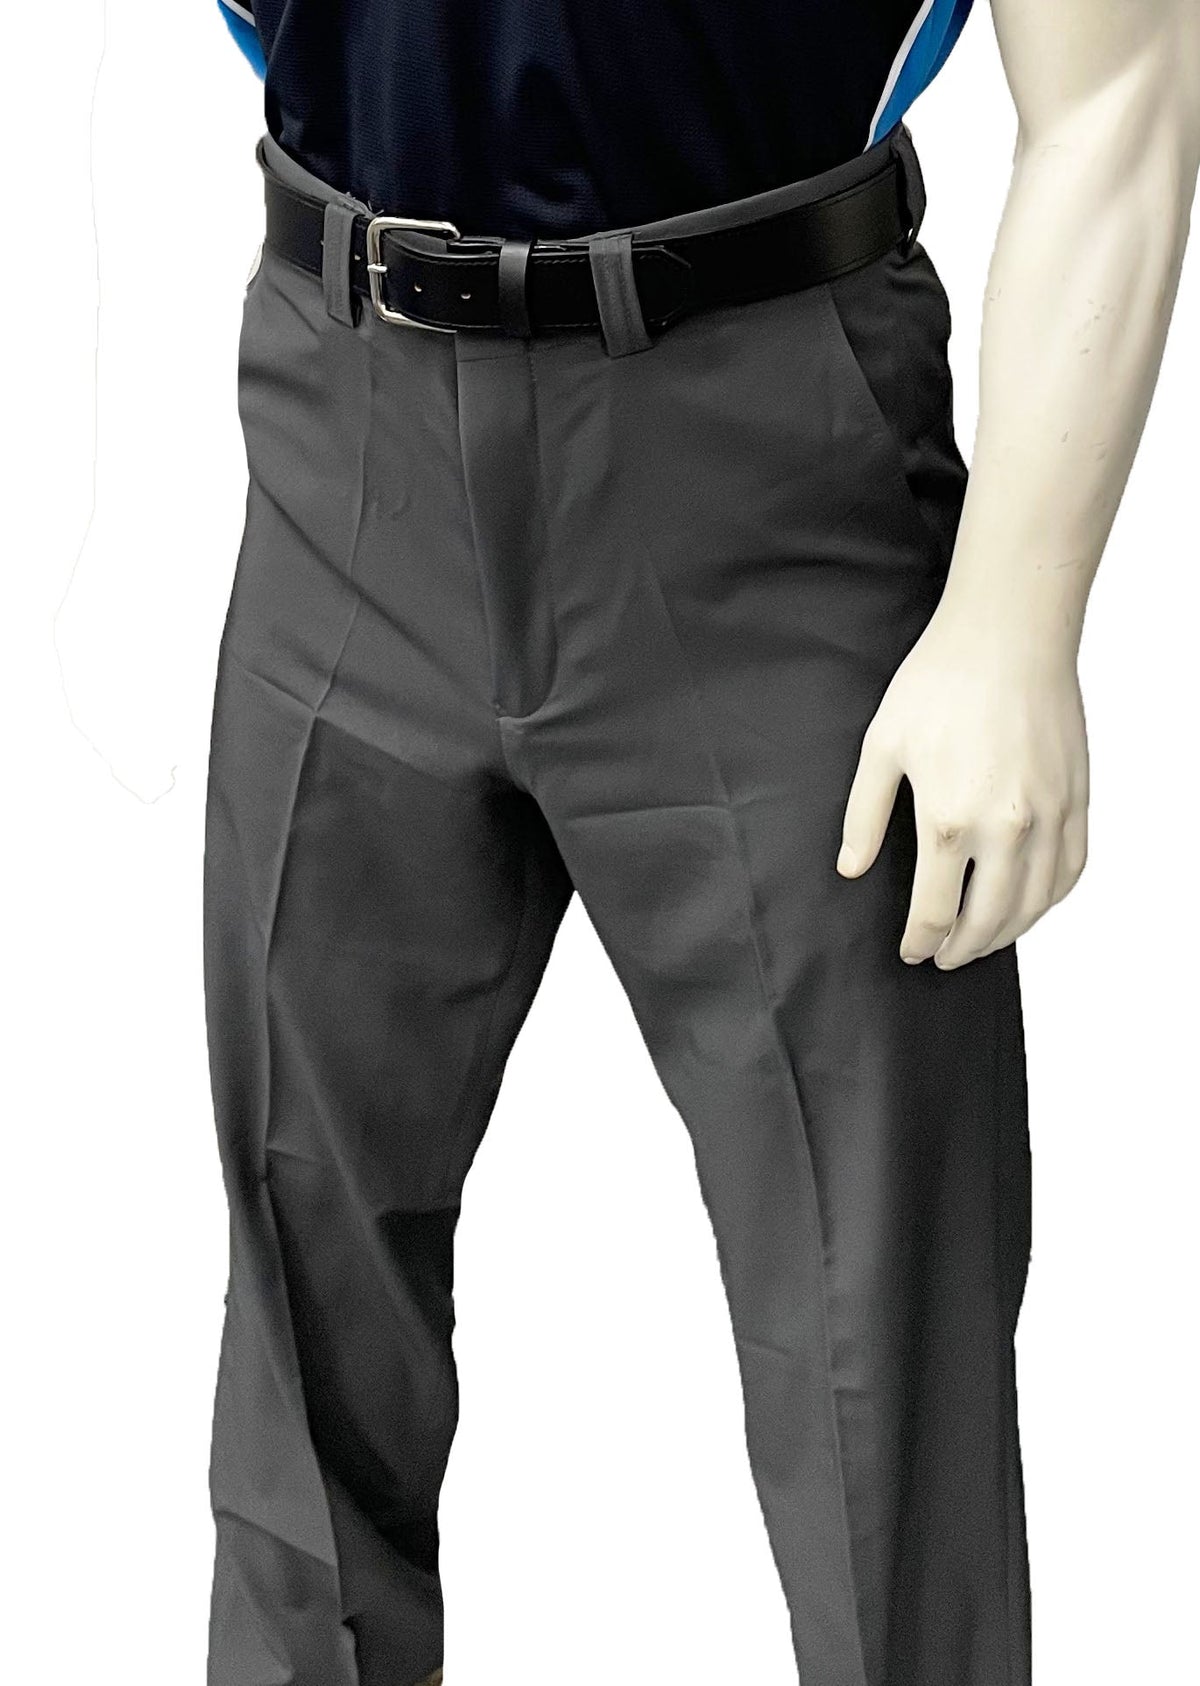 Smitty | BBS-355 | 4-Way Stretch Flat Front Plate Umpire Pants | Charcoal Grey